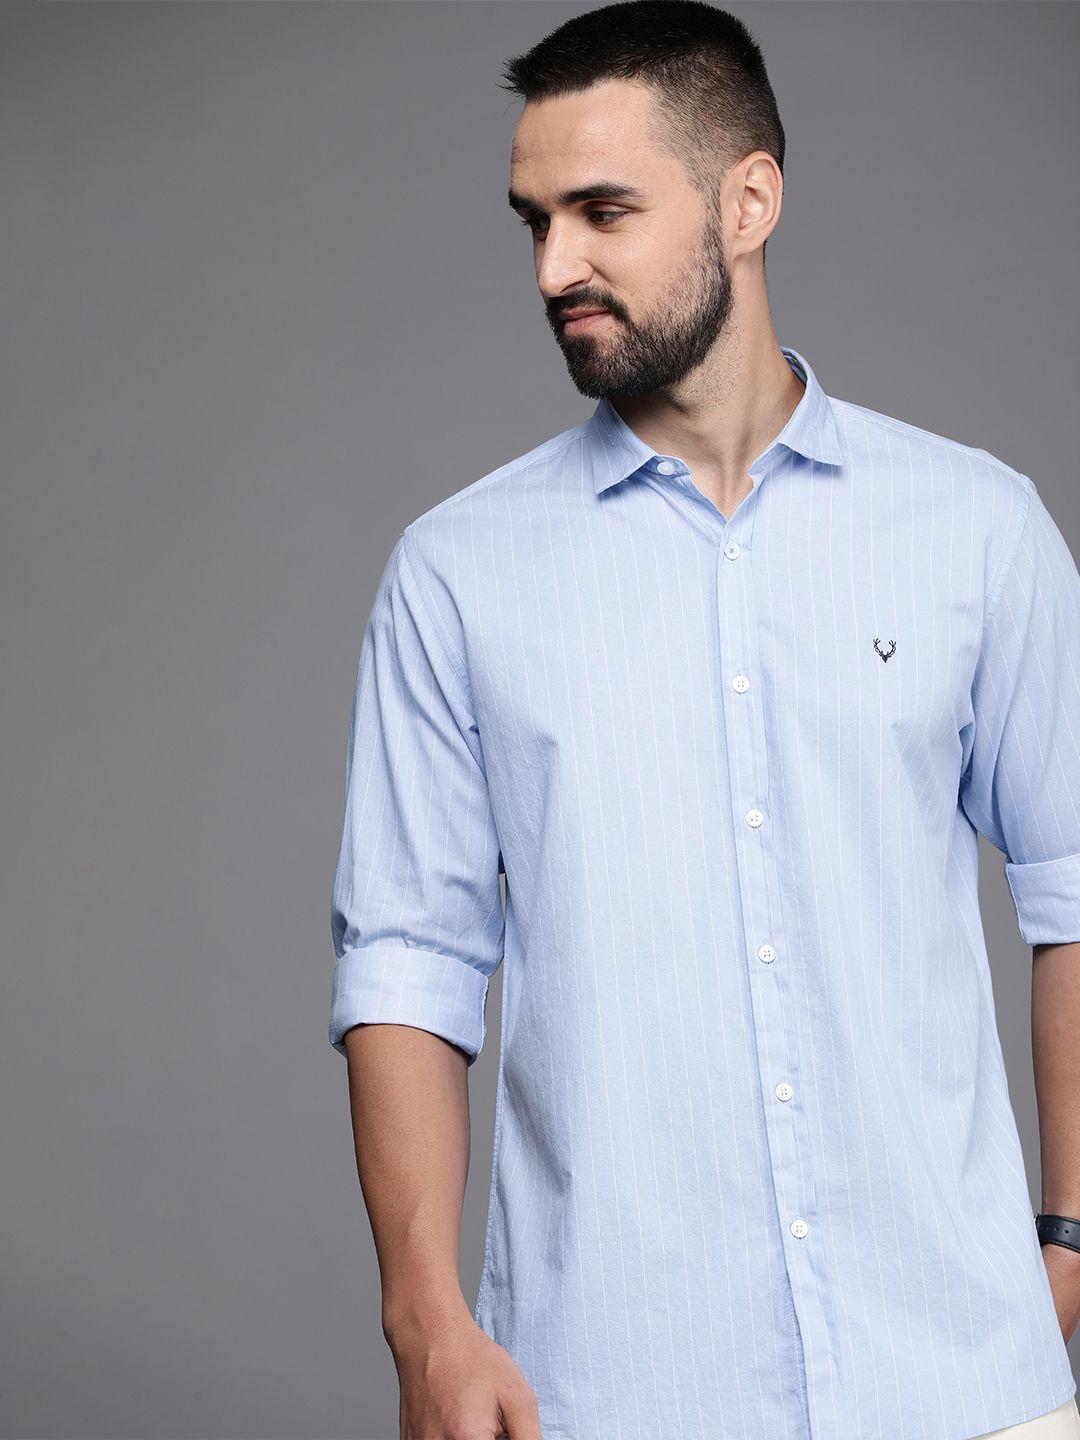 allen-solly-sport-regular-fit-striped-pure-cotton-casual-shirt